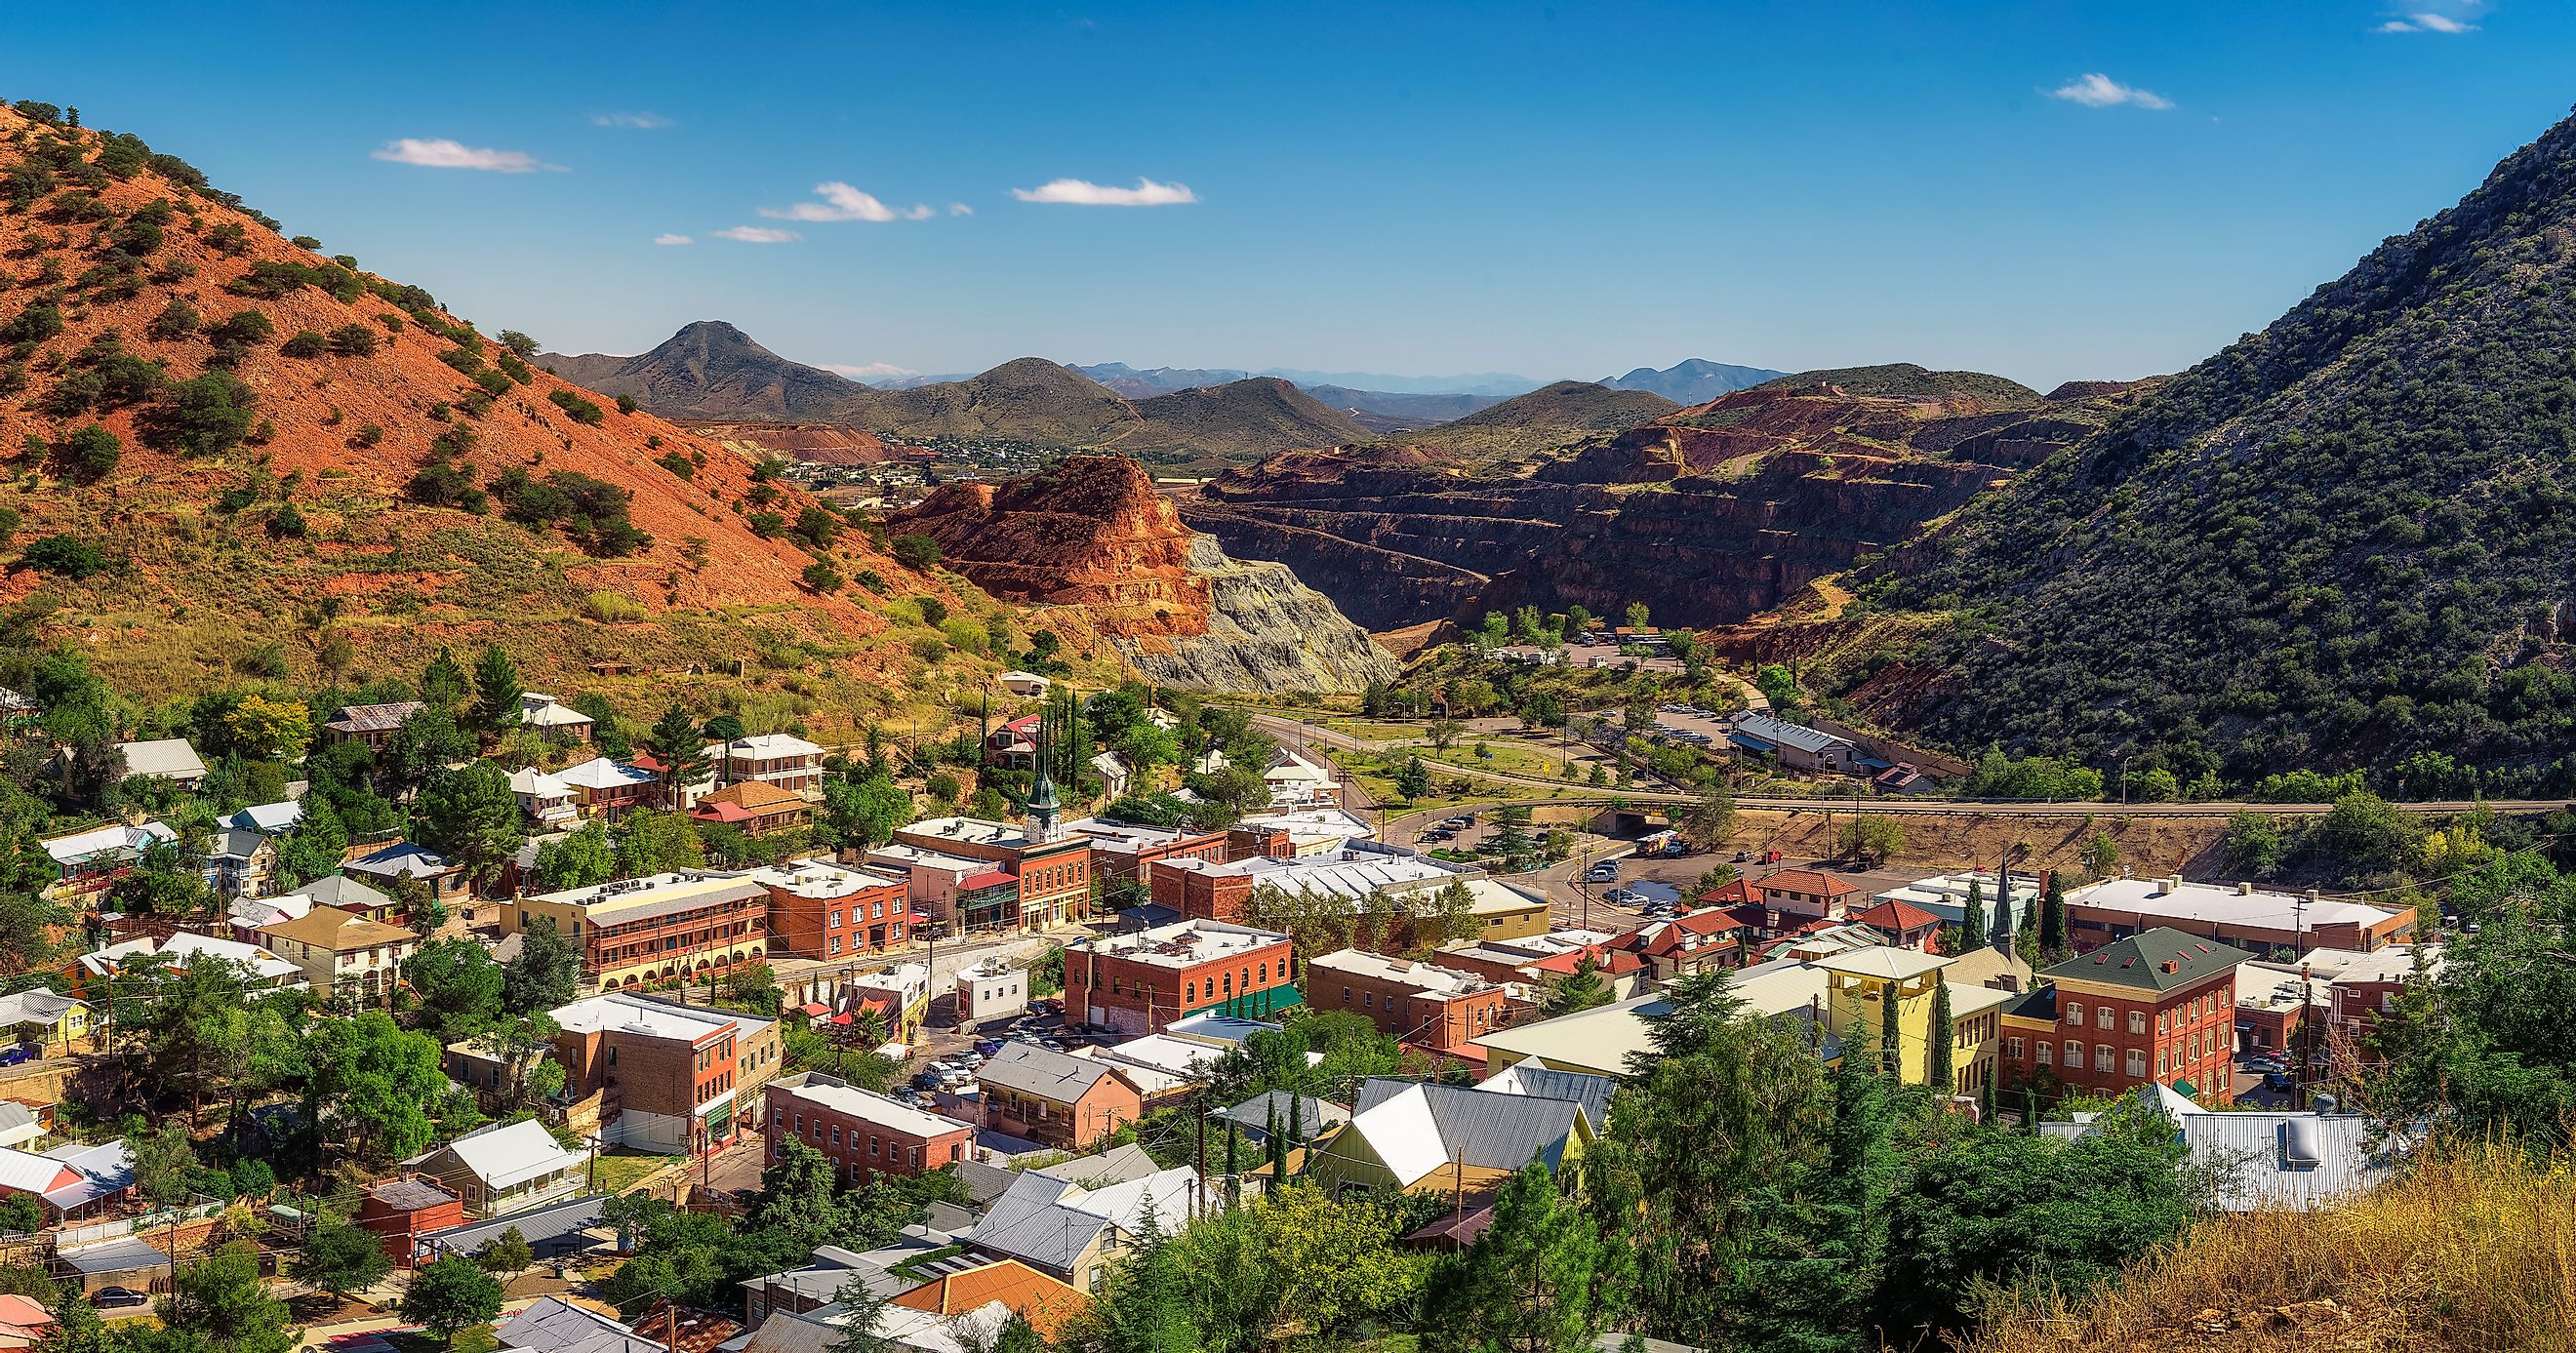 Panorama of Bisbee with surrounding Mule Mountains in Arizona. This historic mining town was built early 1900s and is the county seat of Cochise County